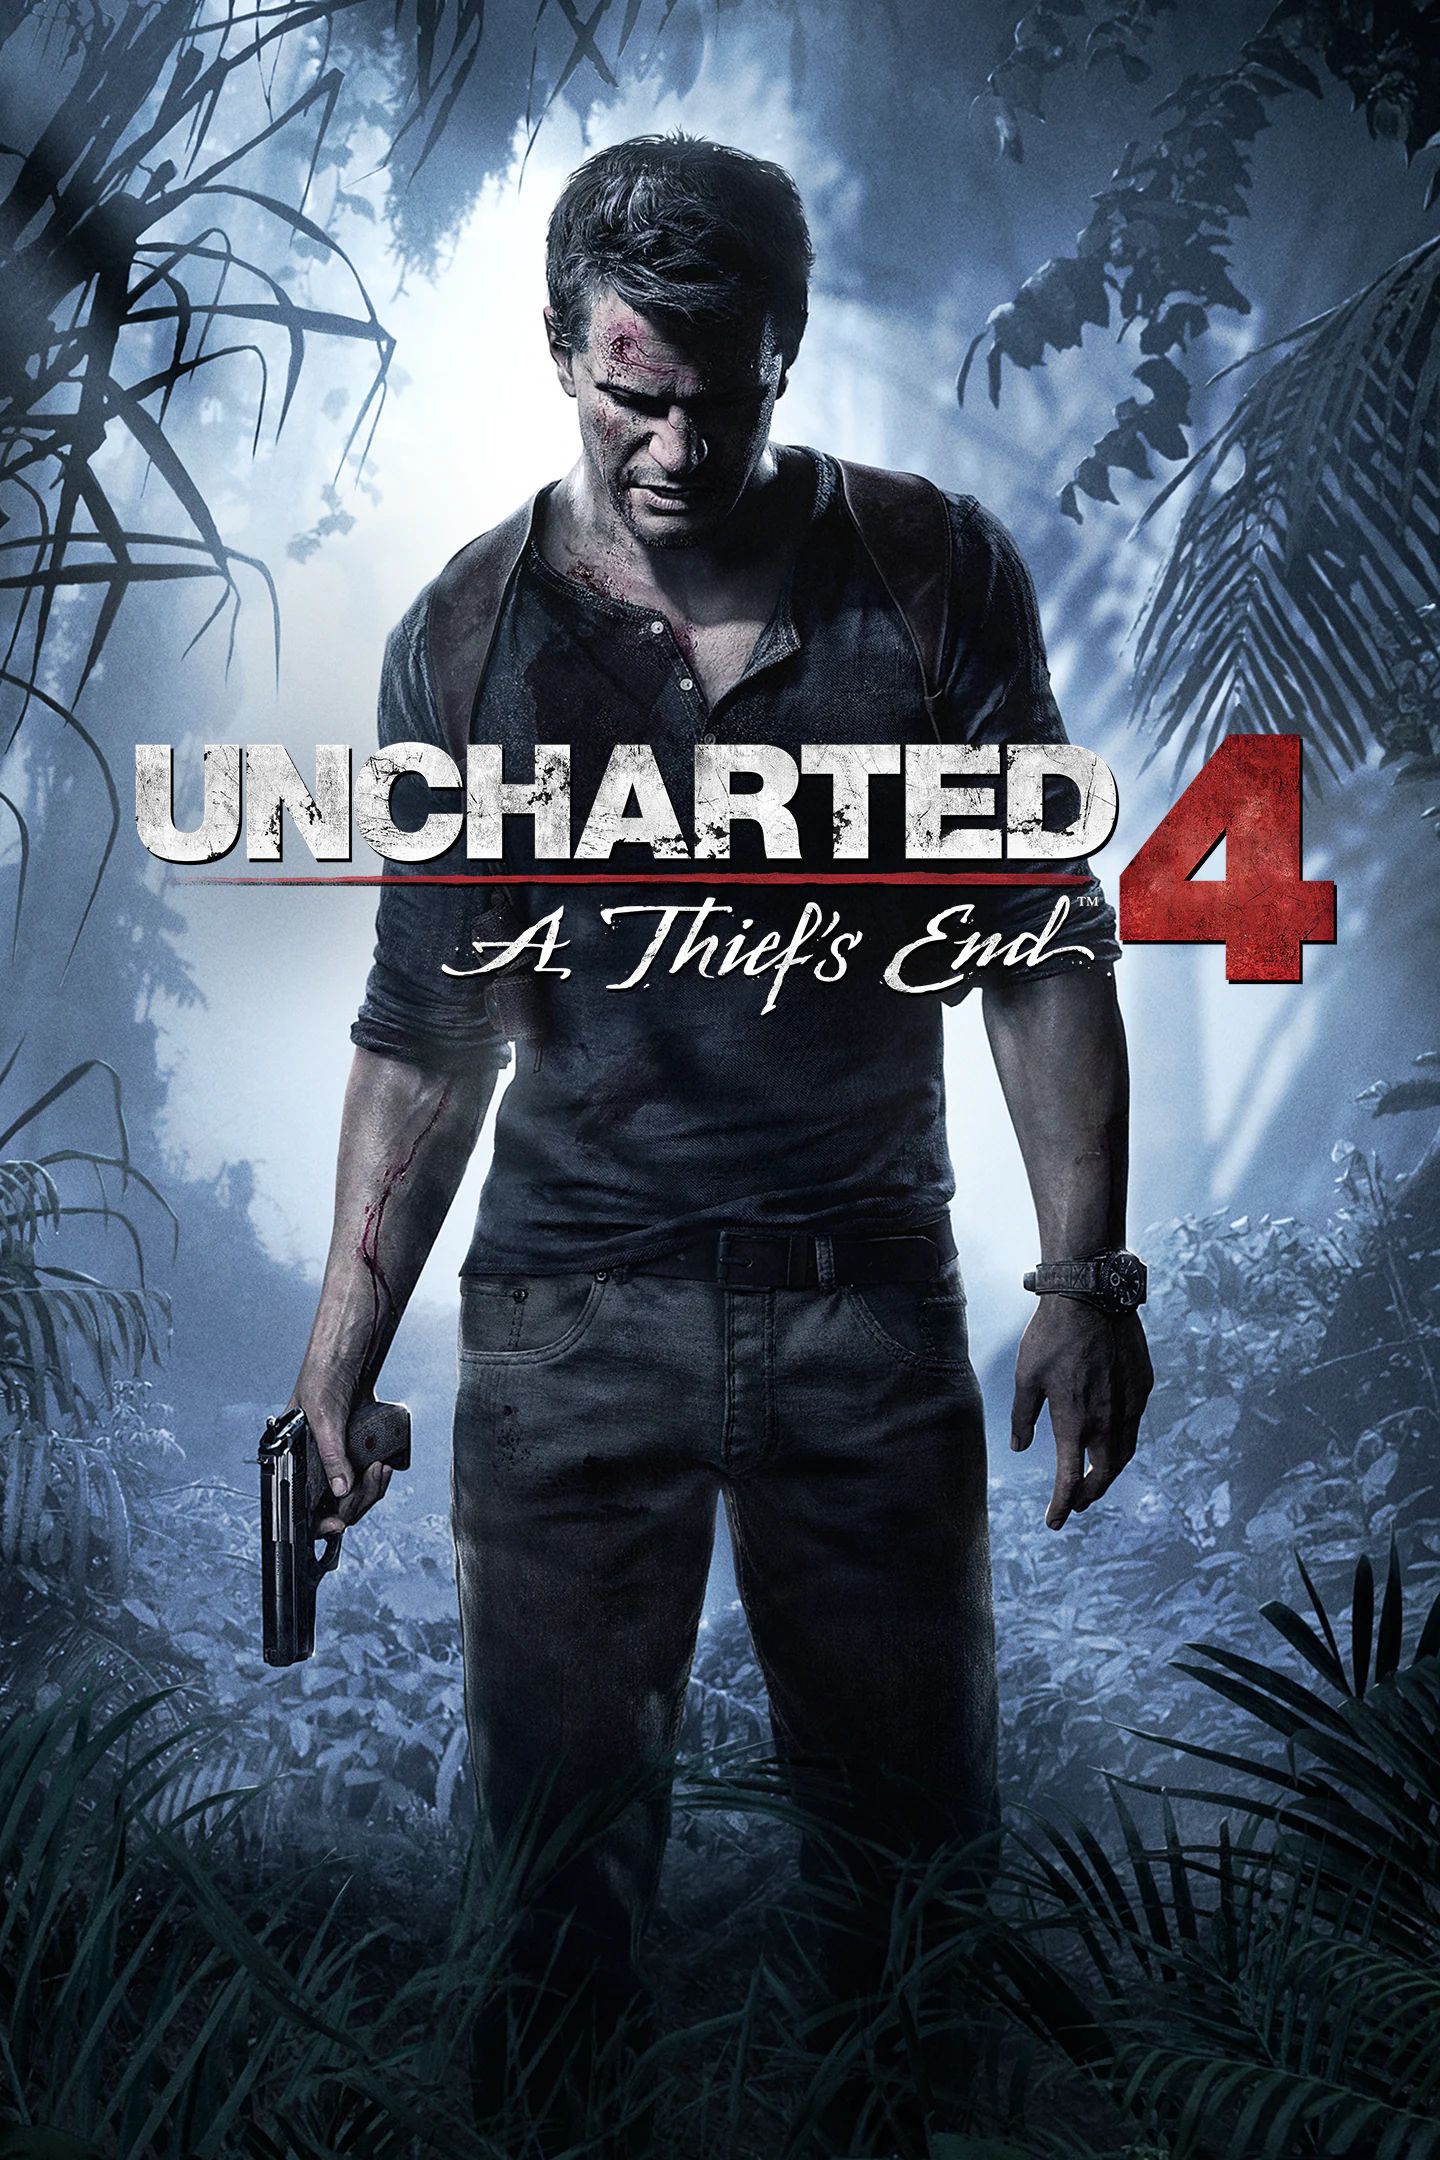 Uncharted 4 A thiefs end game poster